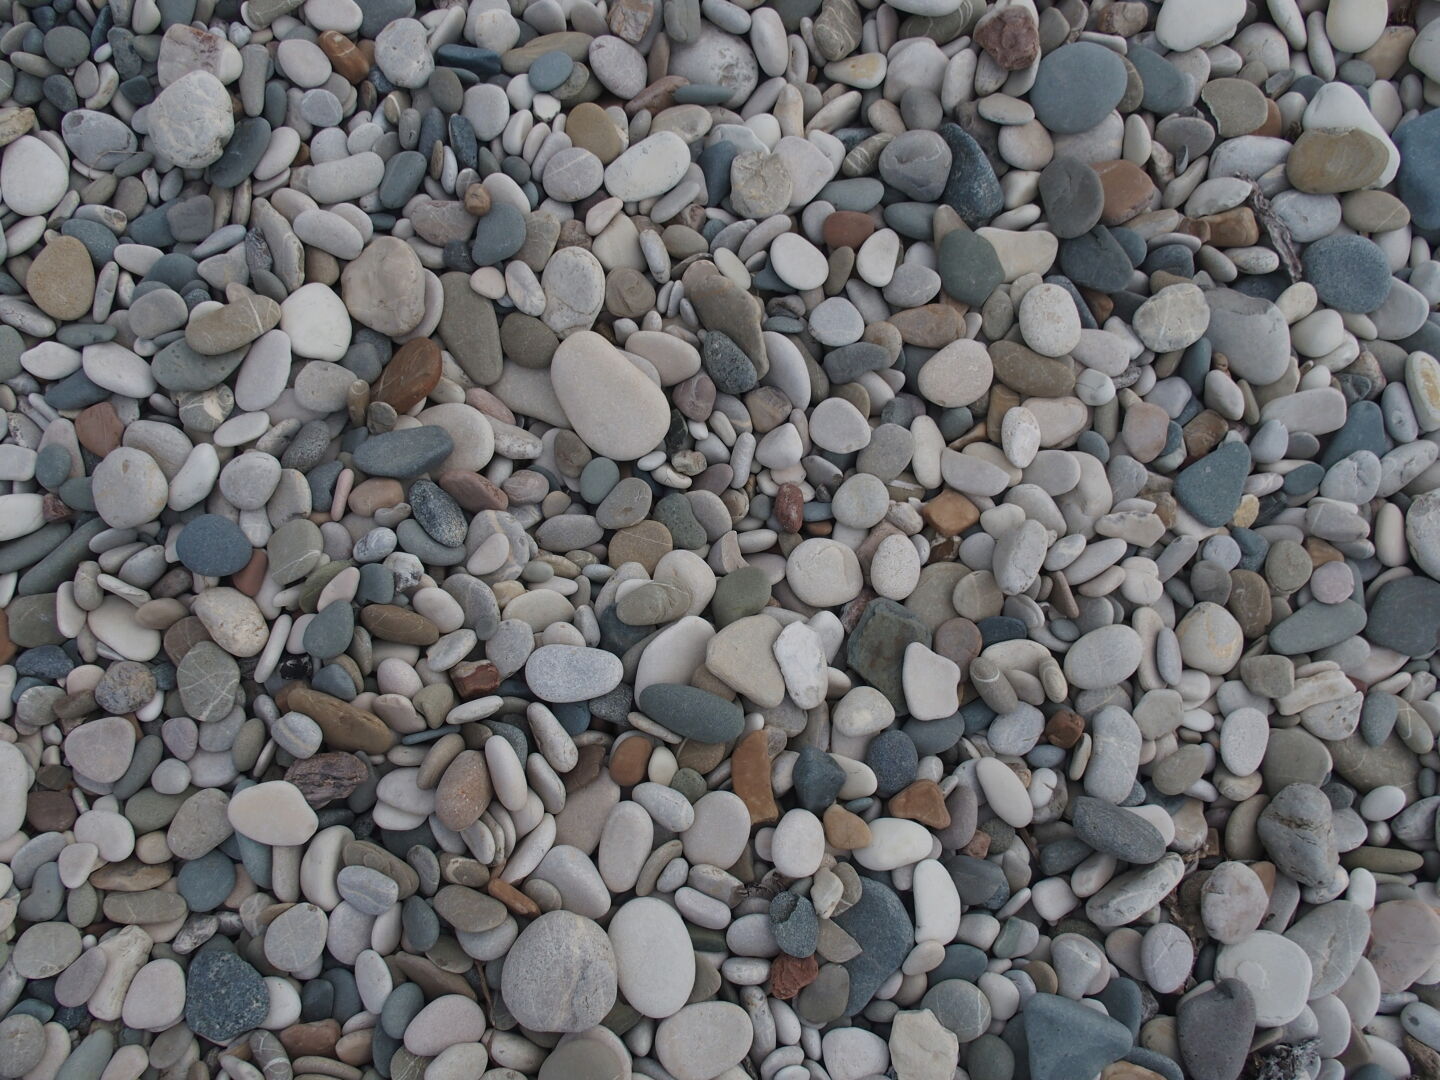 From a huge selection of pebbles...